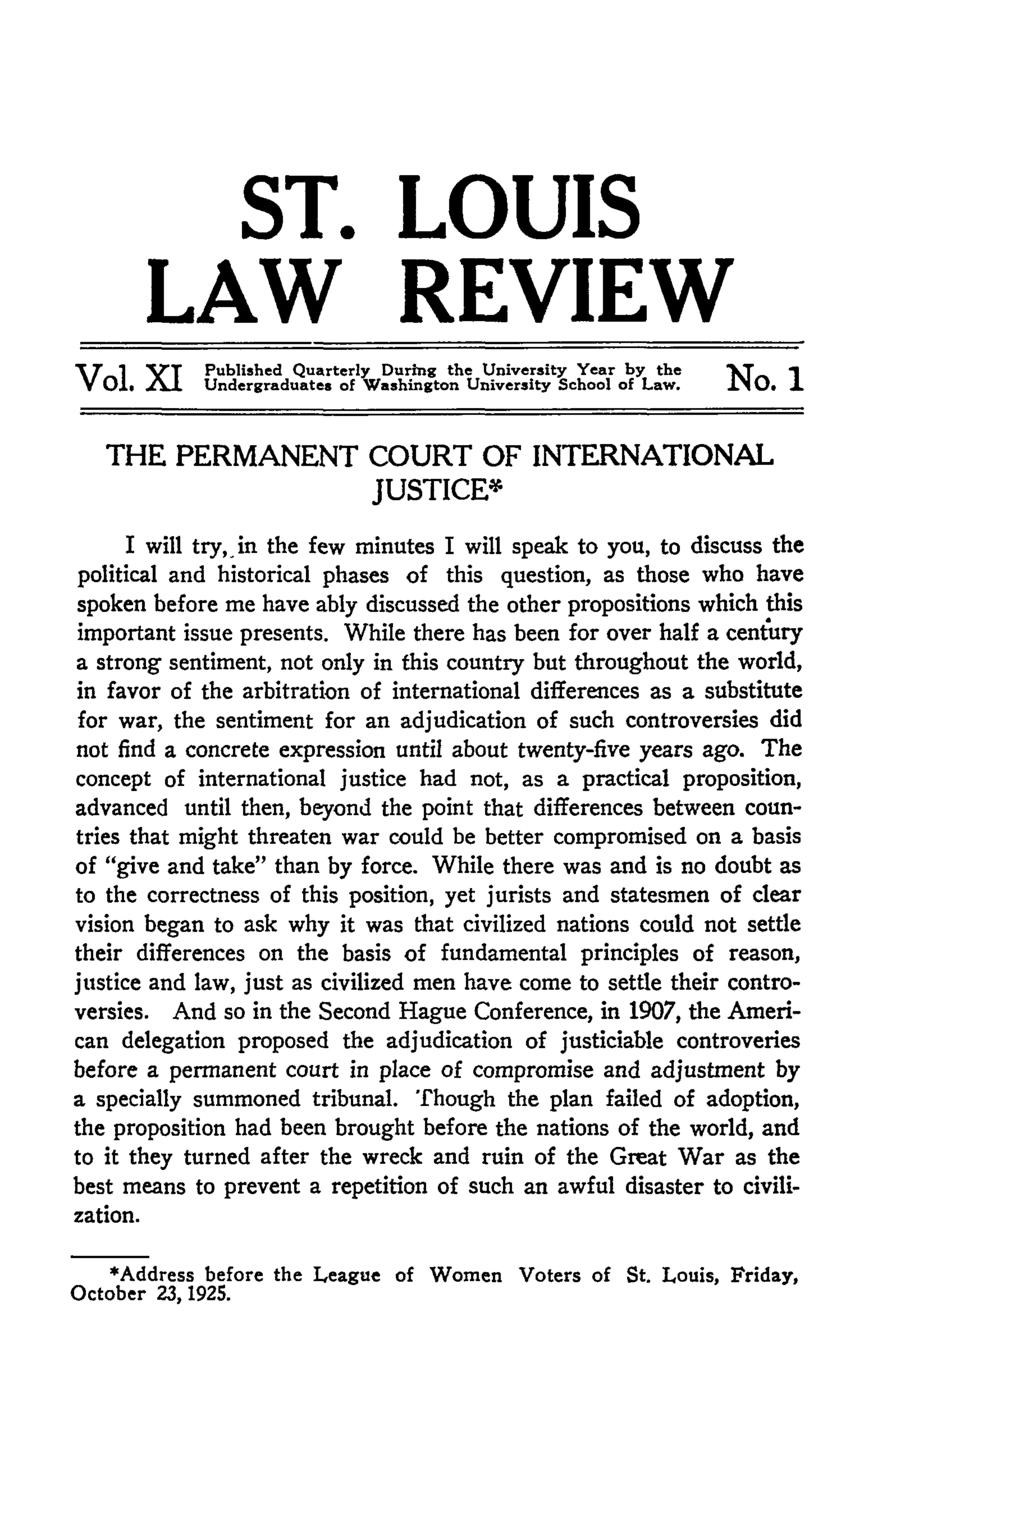 ST. LOUIS LAW REVIEW Vol. XI Published Quarterly During the University Year by the Undergraduates of Washington University School of Law. No.